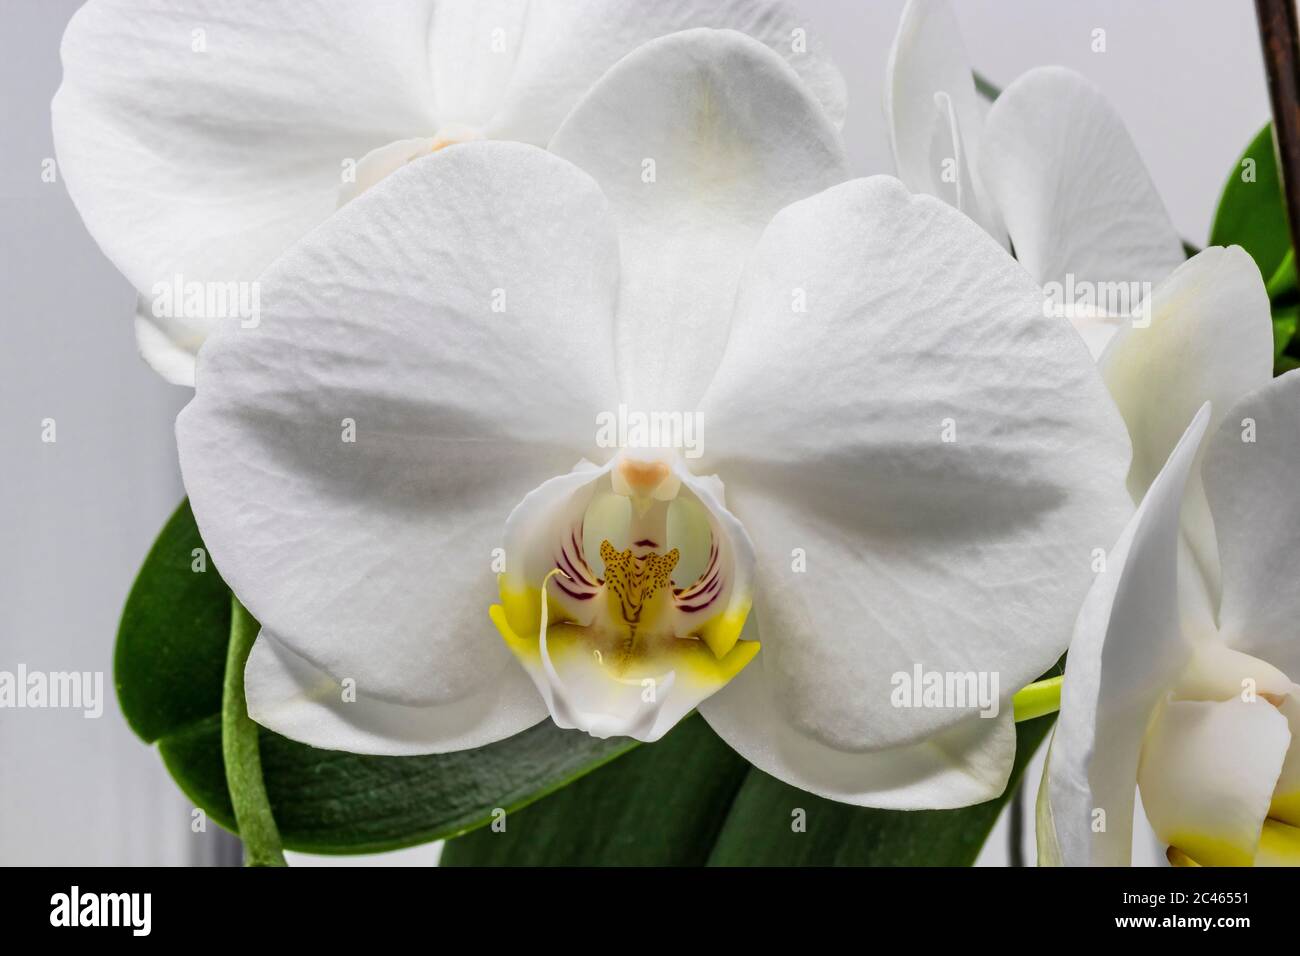 The beautiful flower of white orchid. Macro photograph of a flower detail, isolated on white background. Magnification, enlargement, blow-up, close up Stock Photo